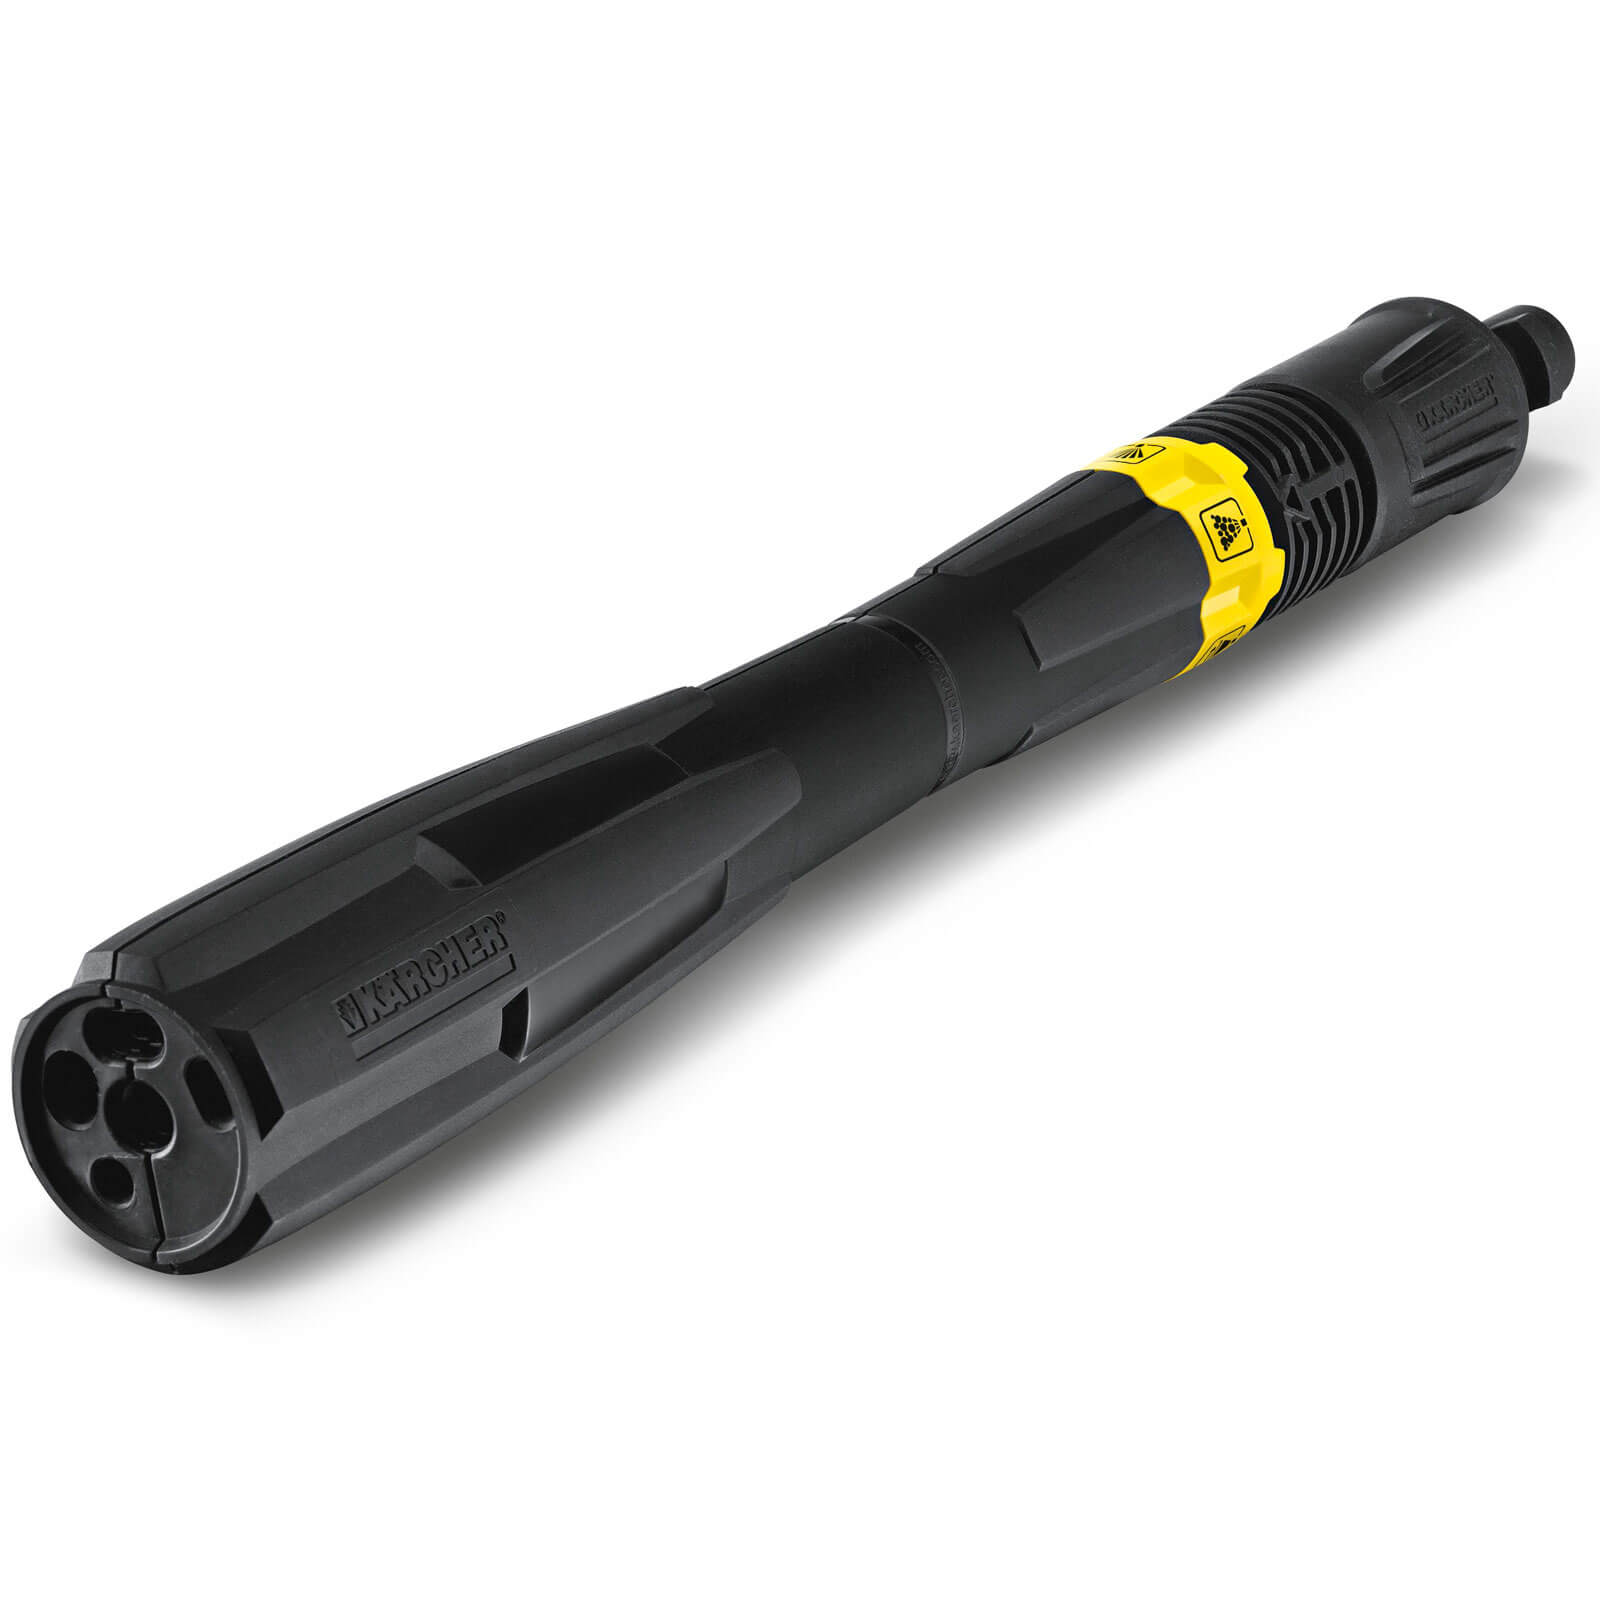 Image of Karcher MP 160 Multi Power Jet Nozzle for K7 Pressure Washers